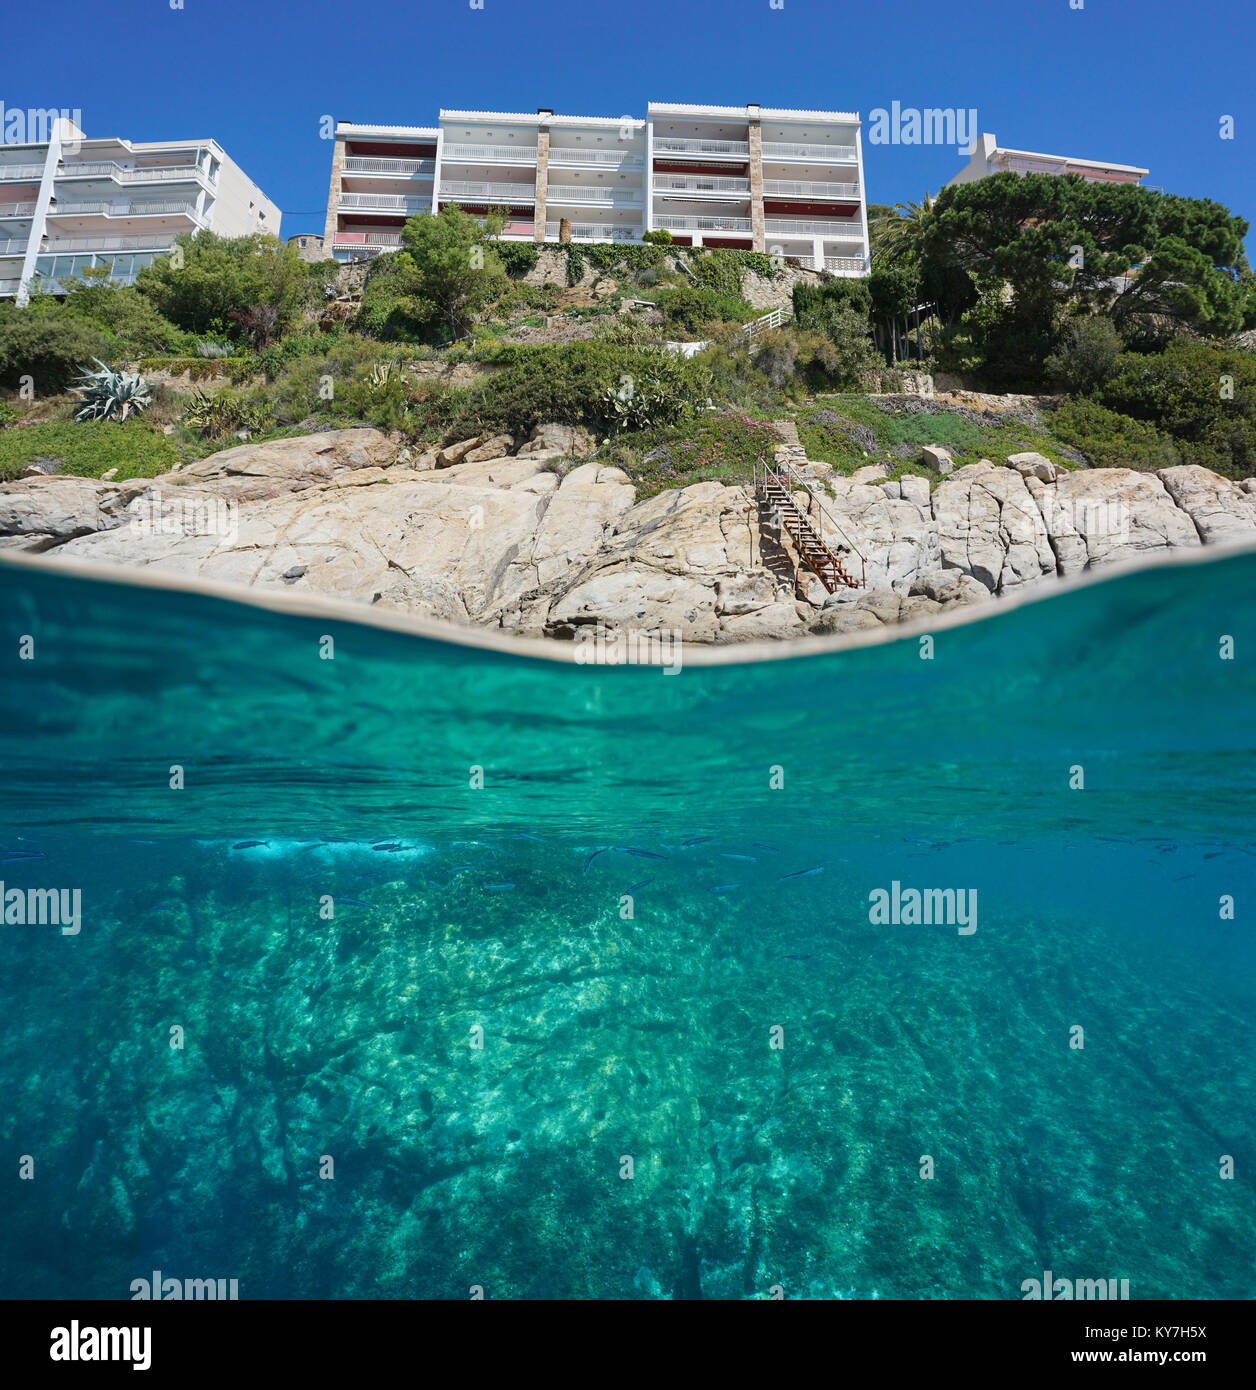 Over and under sea surface, apartment buildings with stair leading to rocky shore and rock underwatern, Spain, Costa Brava, Mediterranean, Girona Stock Photo